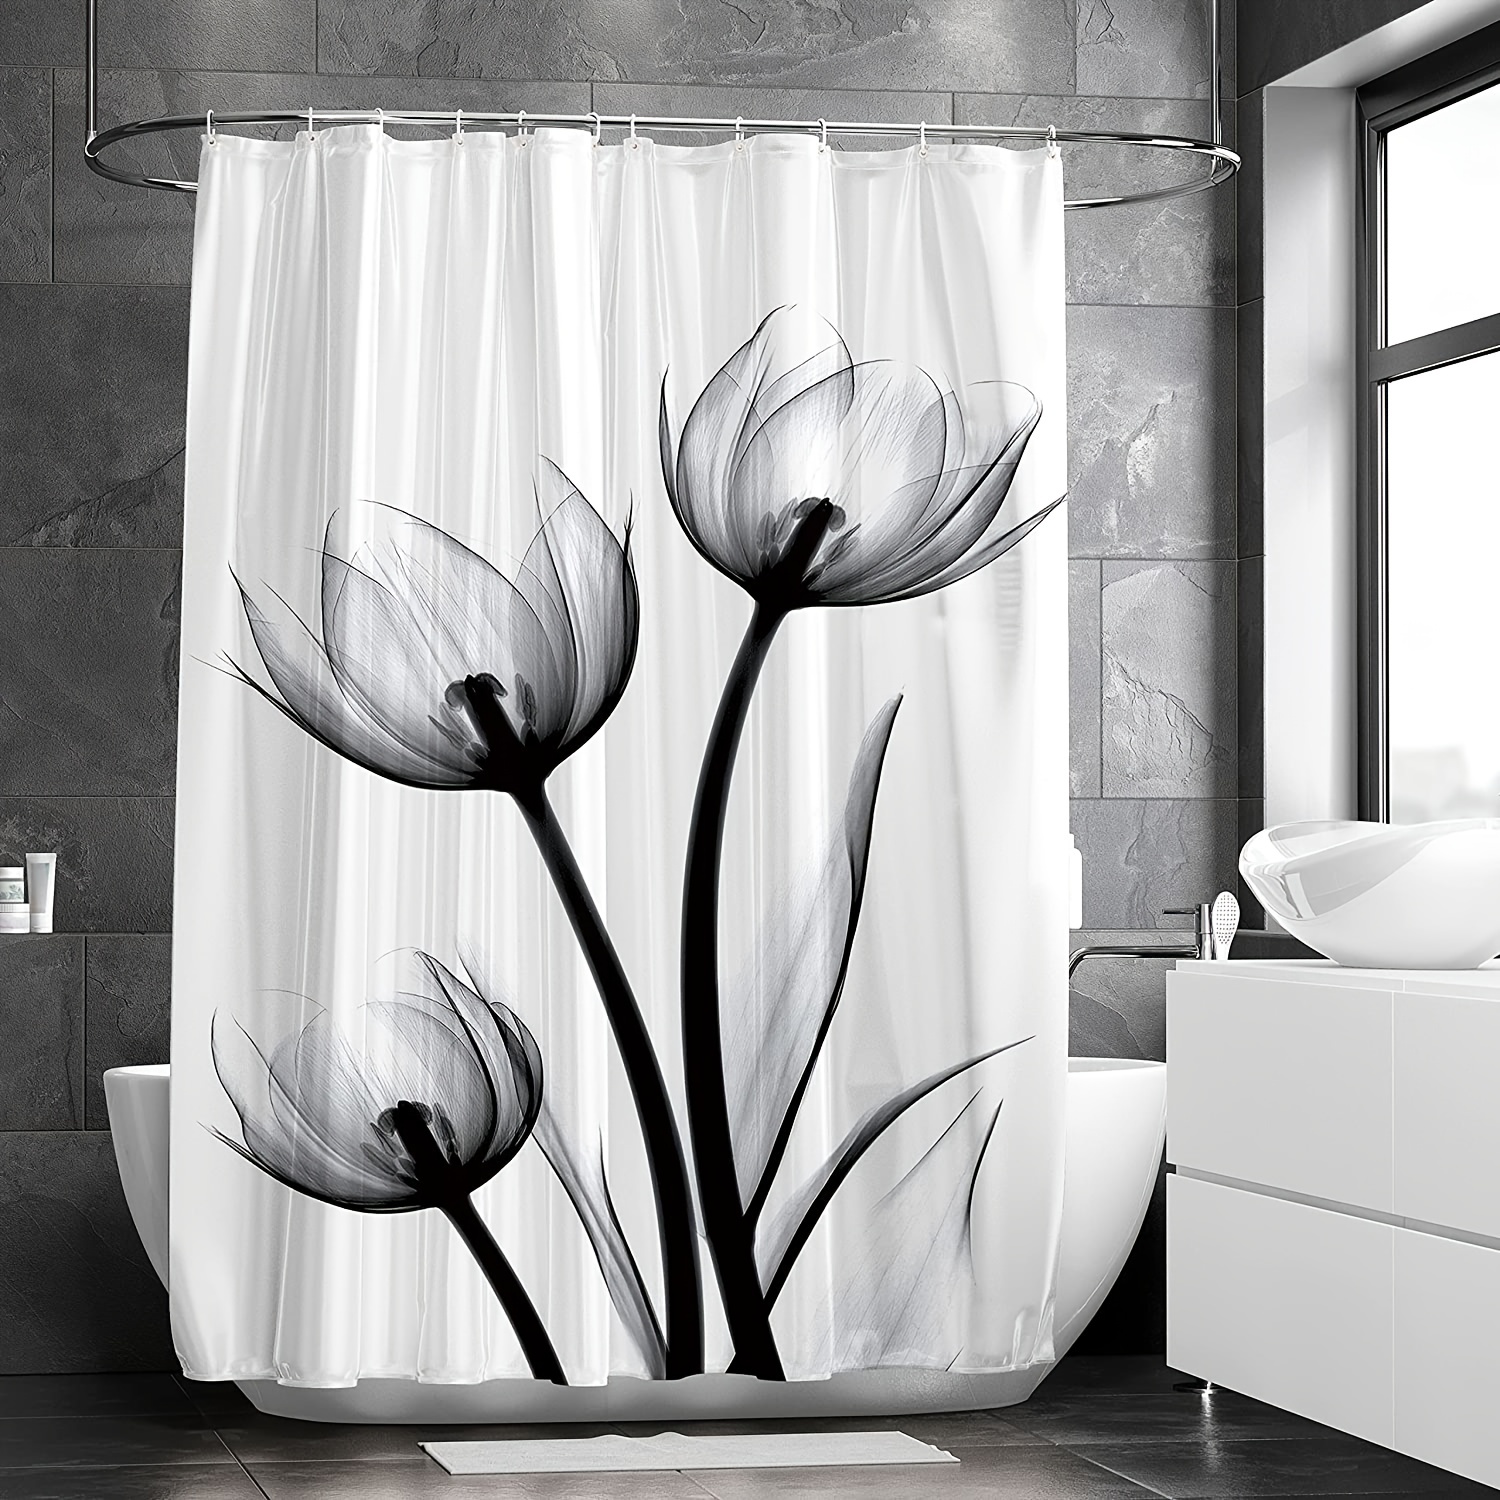 Buy 1pc Black & White Shower Curtain with Elegant Watercolor Tulip Floral Fabric from Our Store